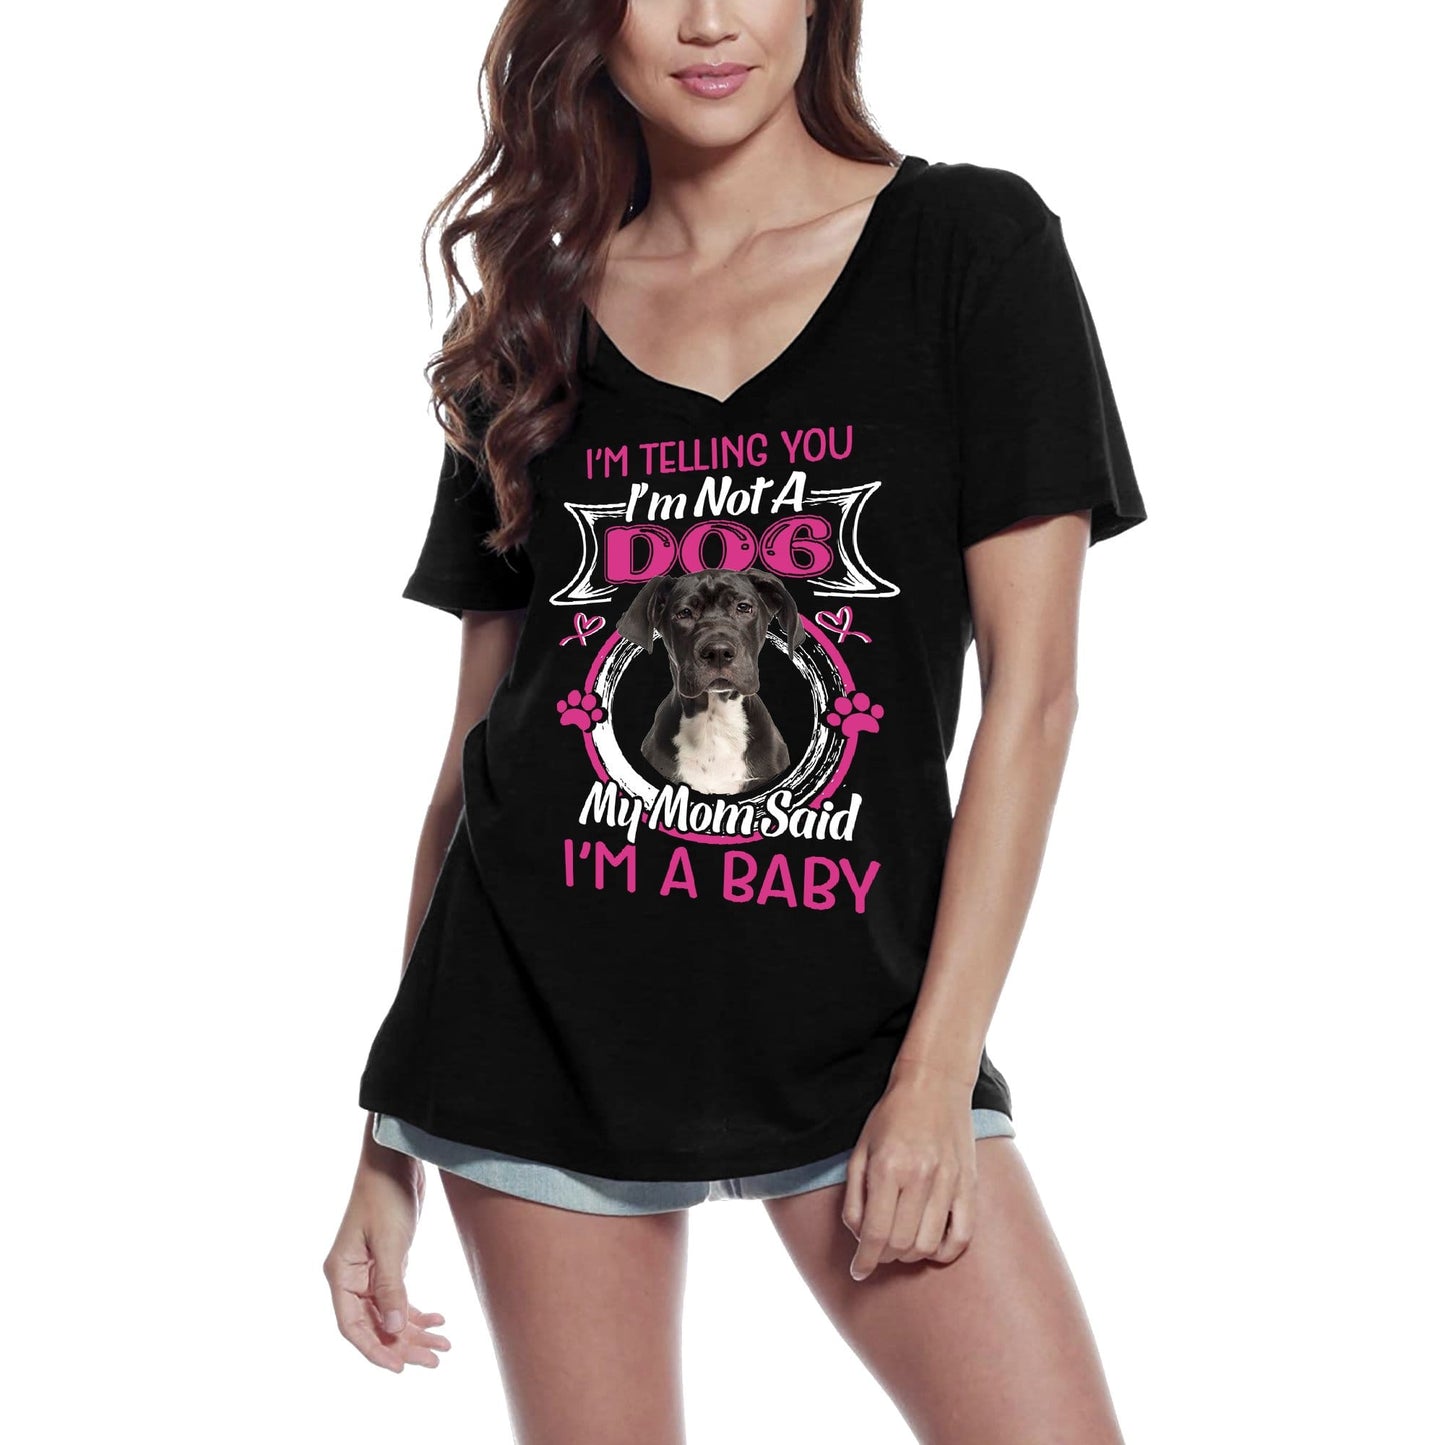 ULTRABASIC Women's T-Shirt I'm Telling You I'm Not a Great Dane - My Mom Said I'm a Baby - Cute Puppy Dog Lover Tee Shirt